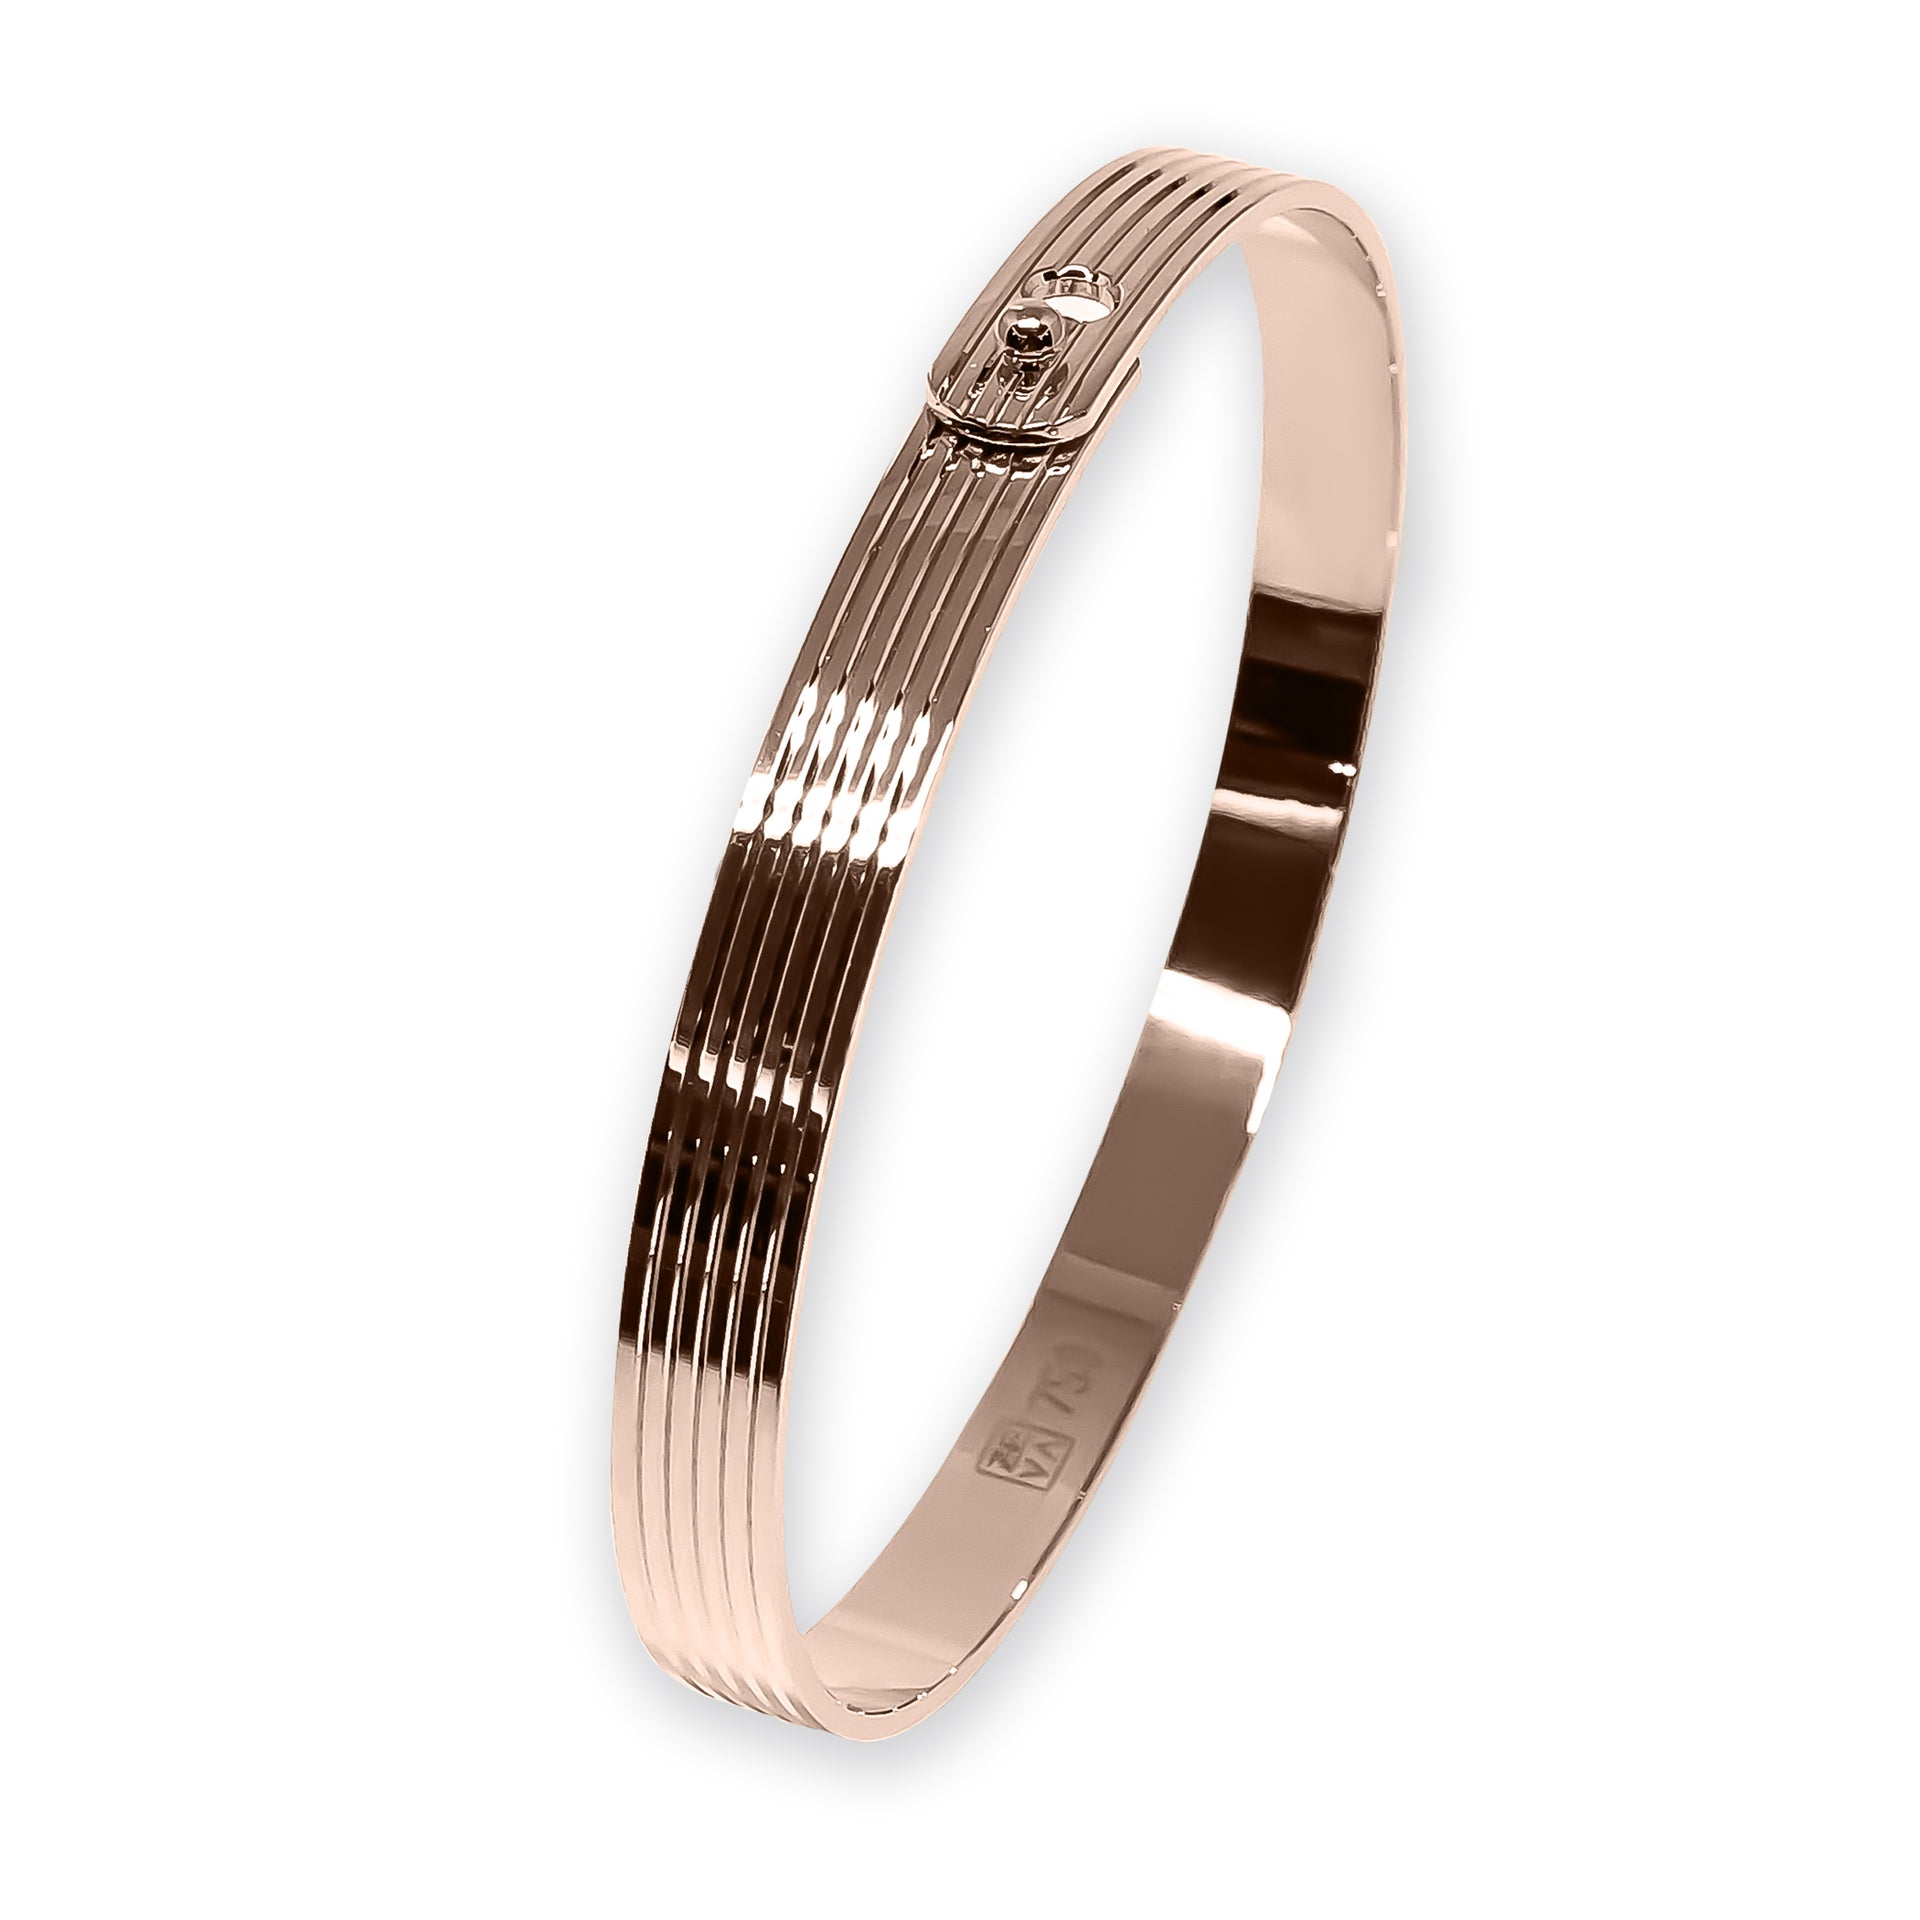 Bracelet MOTION 6mm flexible with pin claps red gold 18k 750